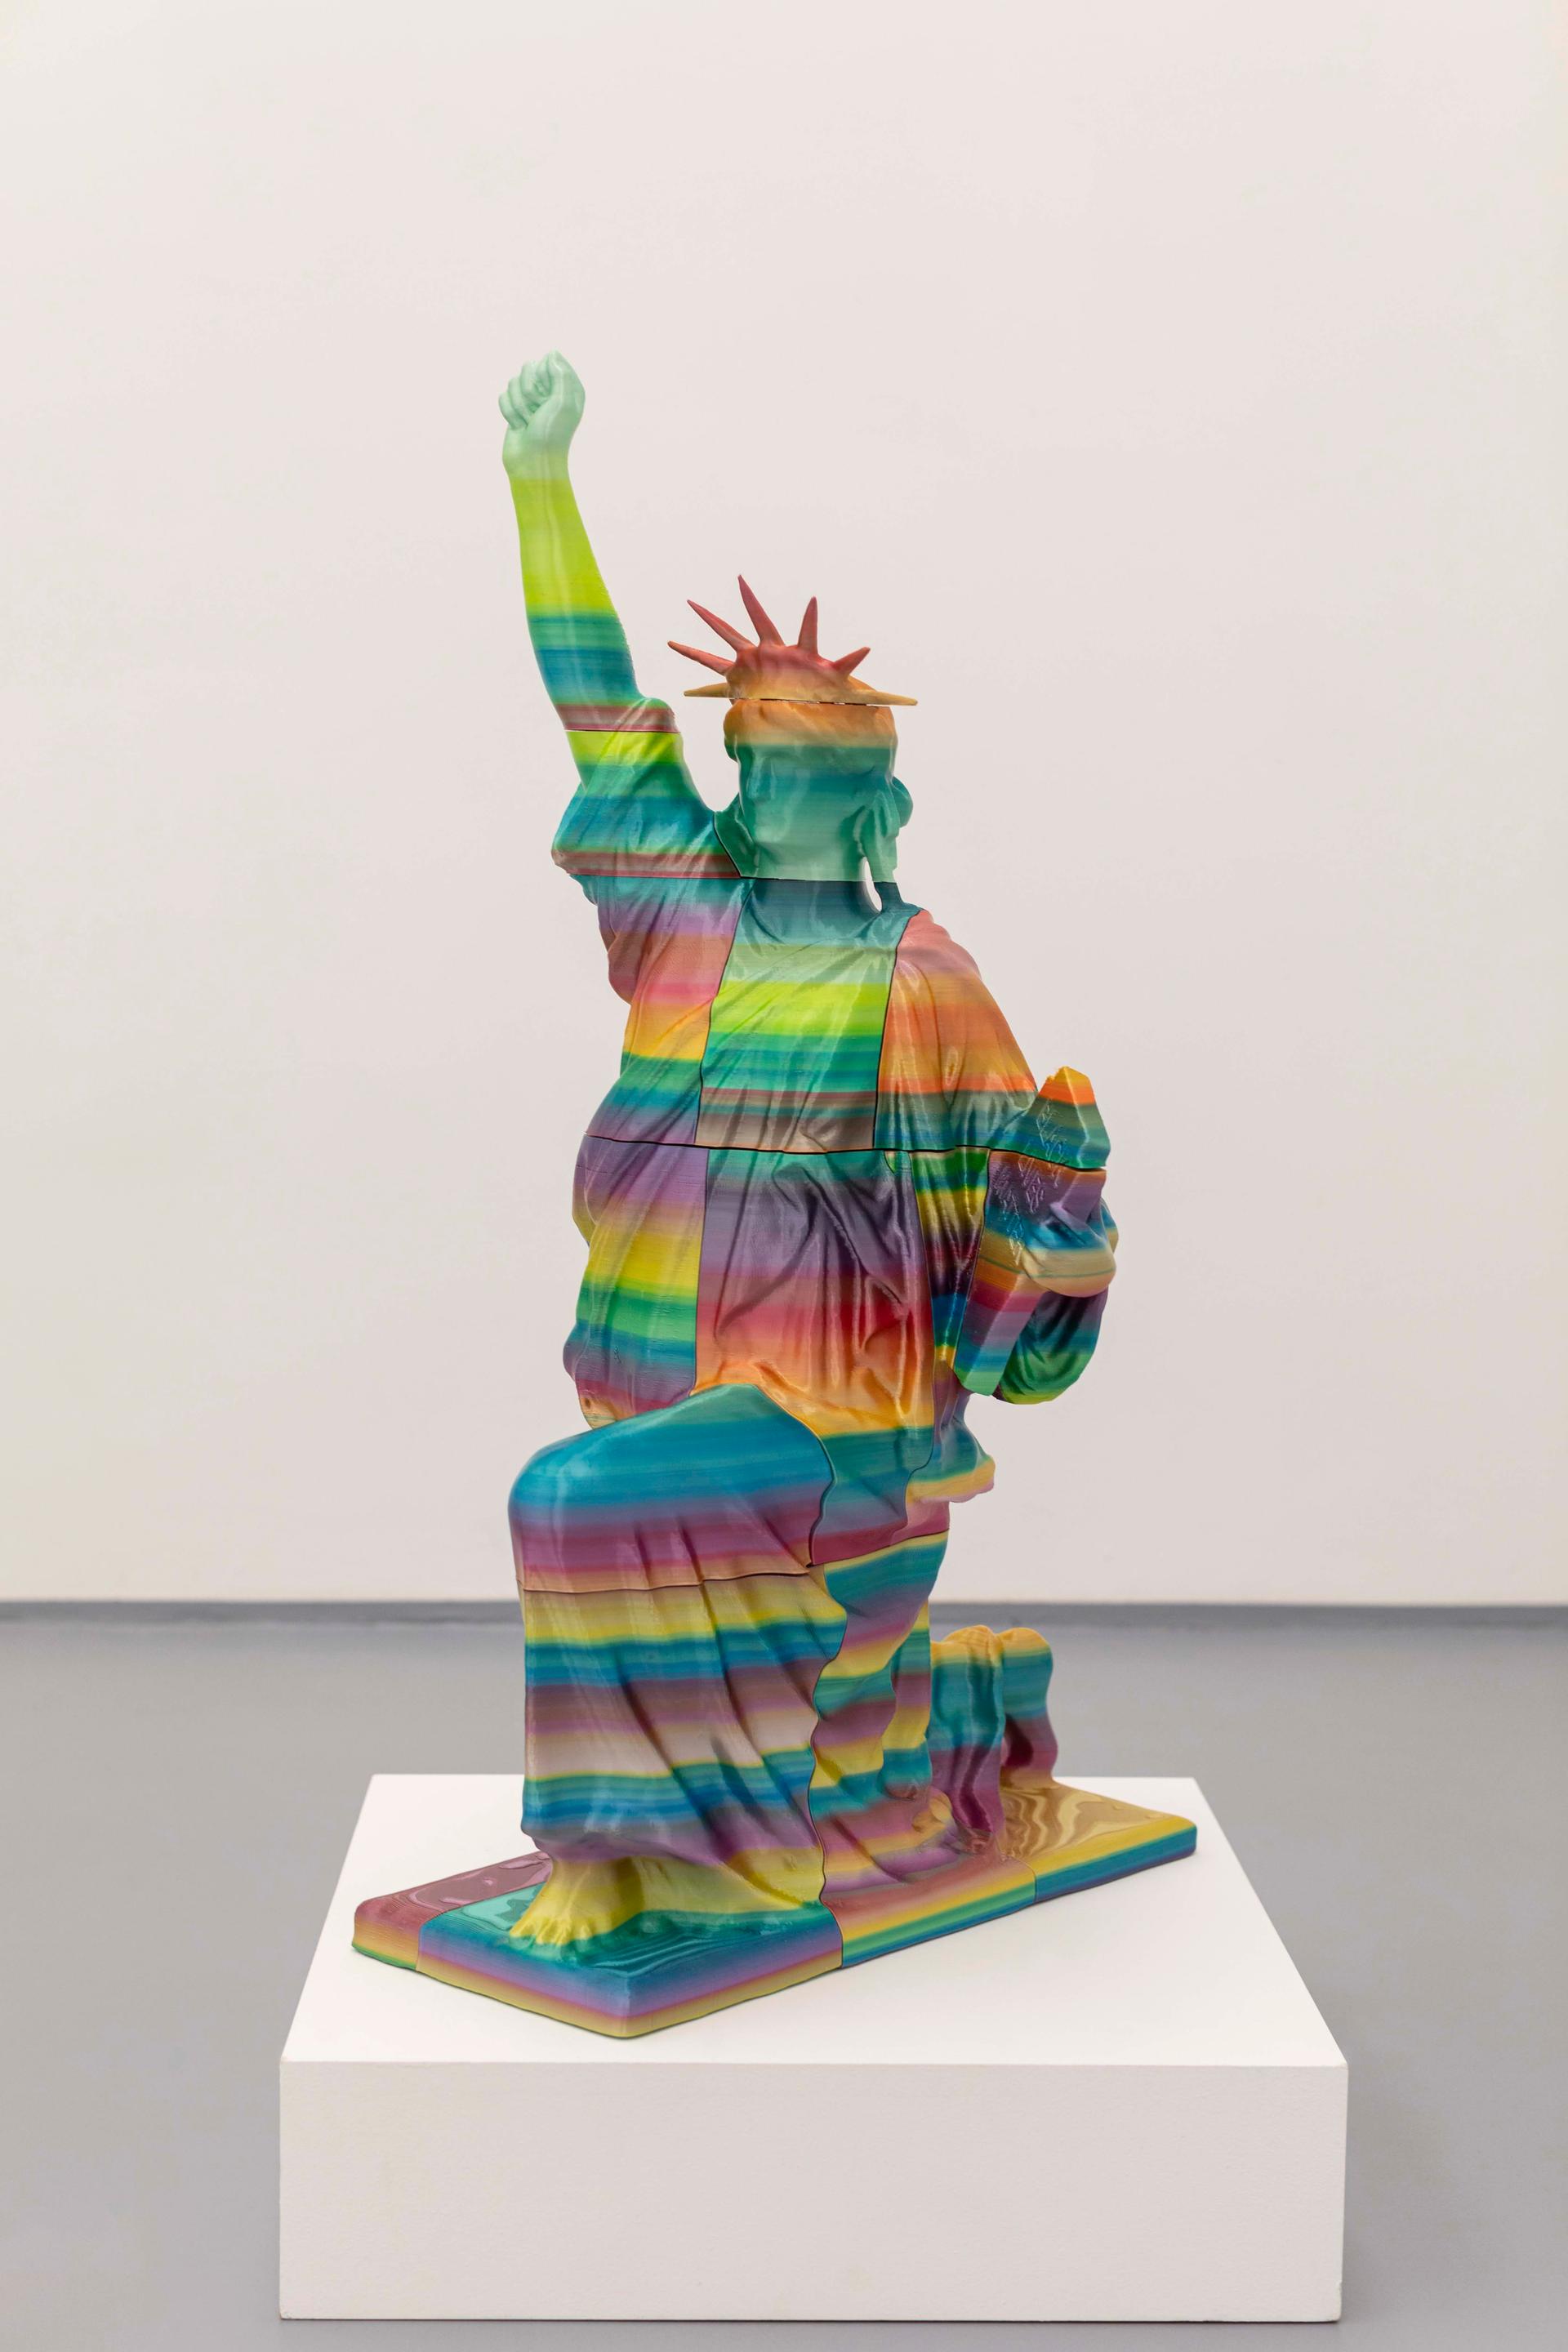 A miniature sculpture of Lady Liberty holding a tablet that reads 